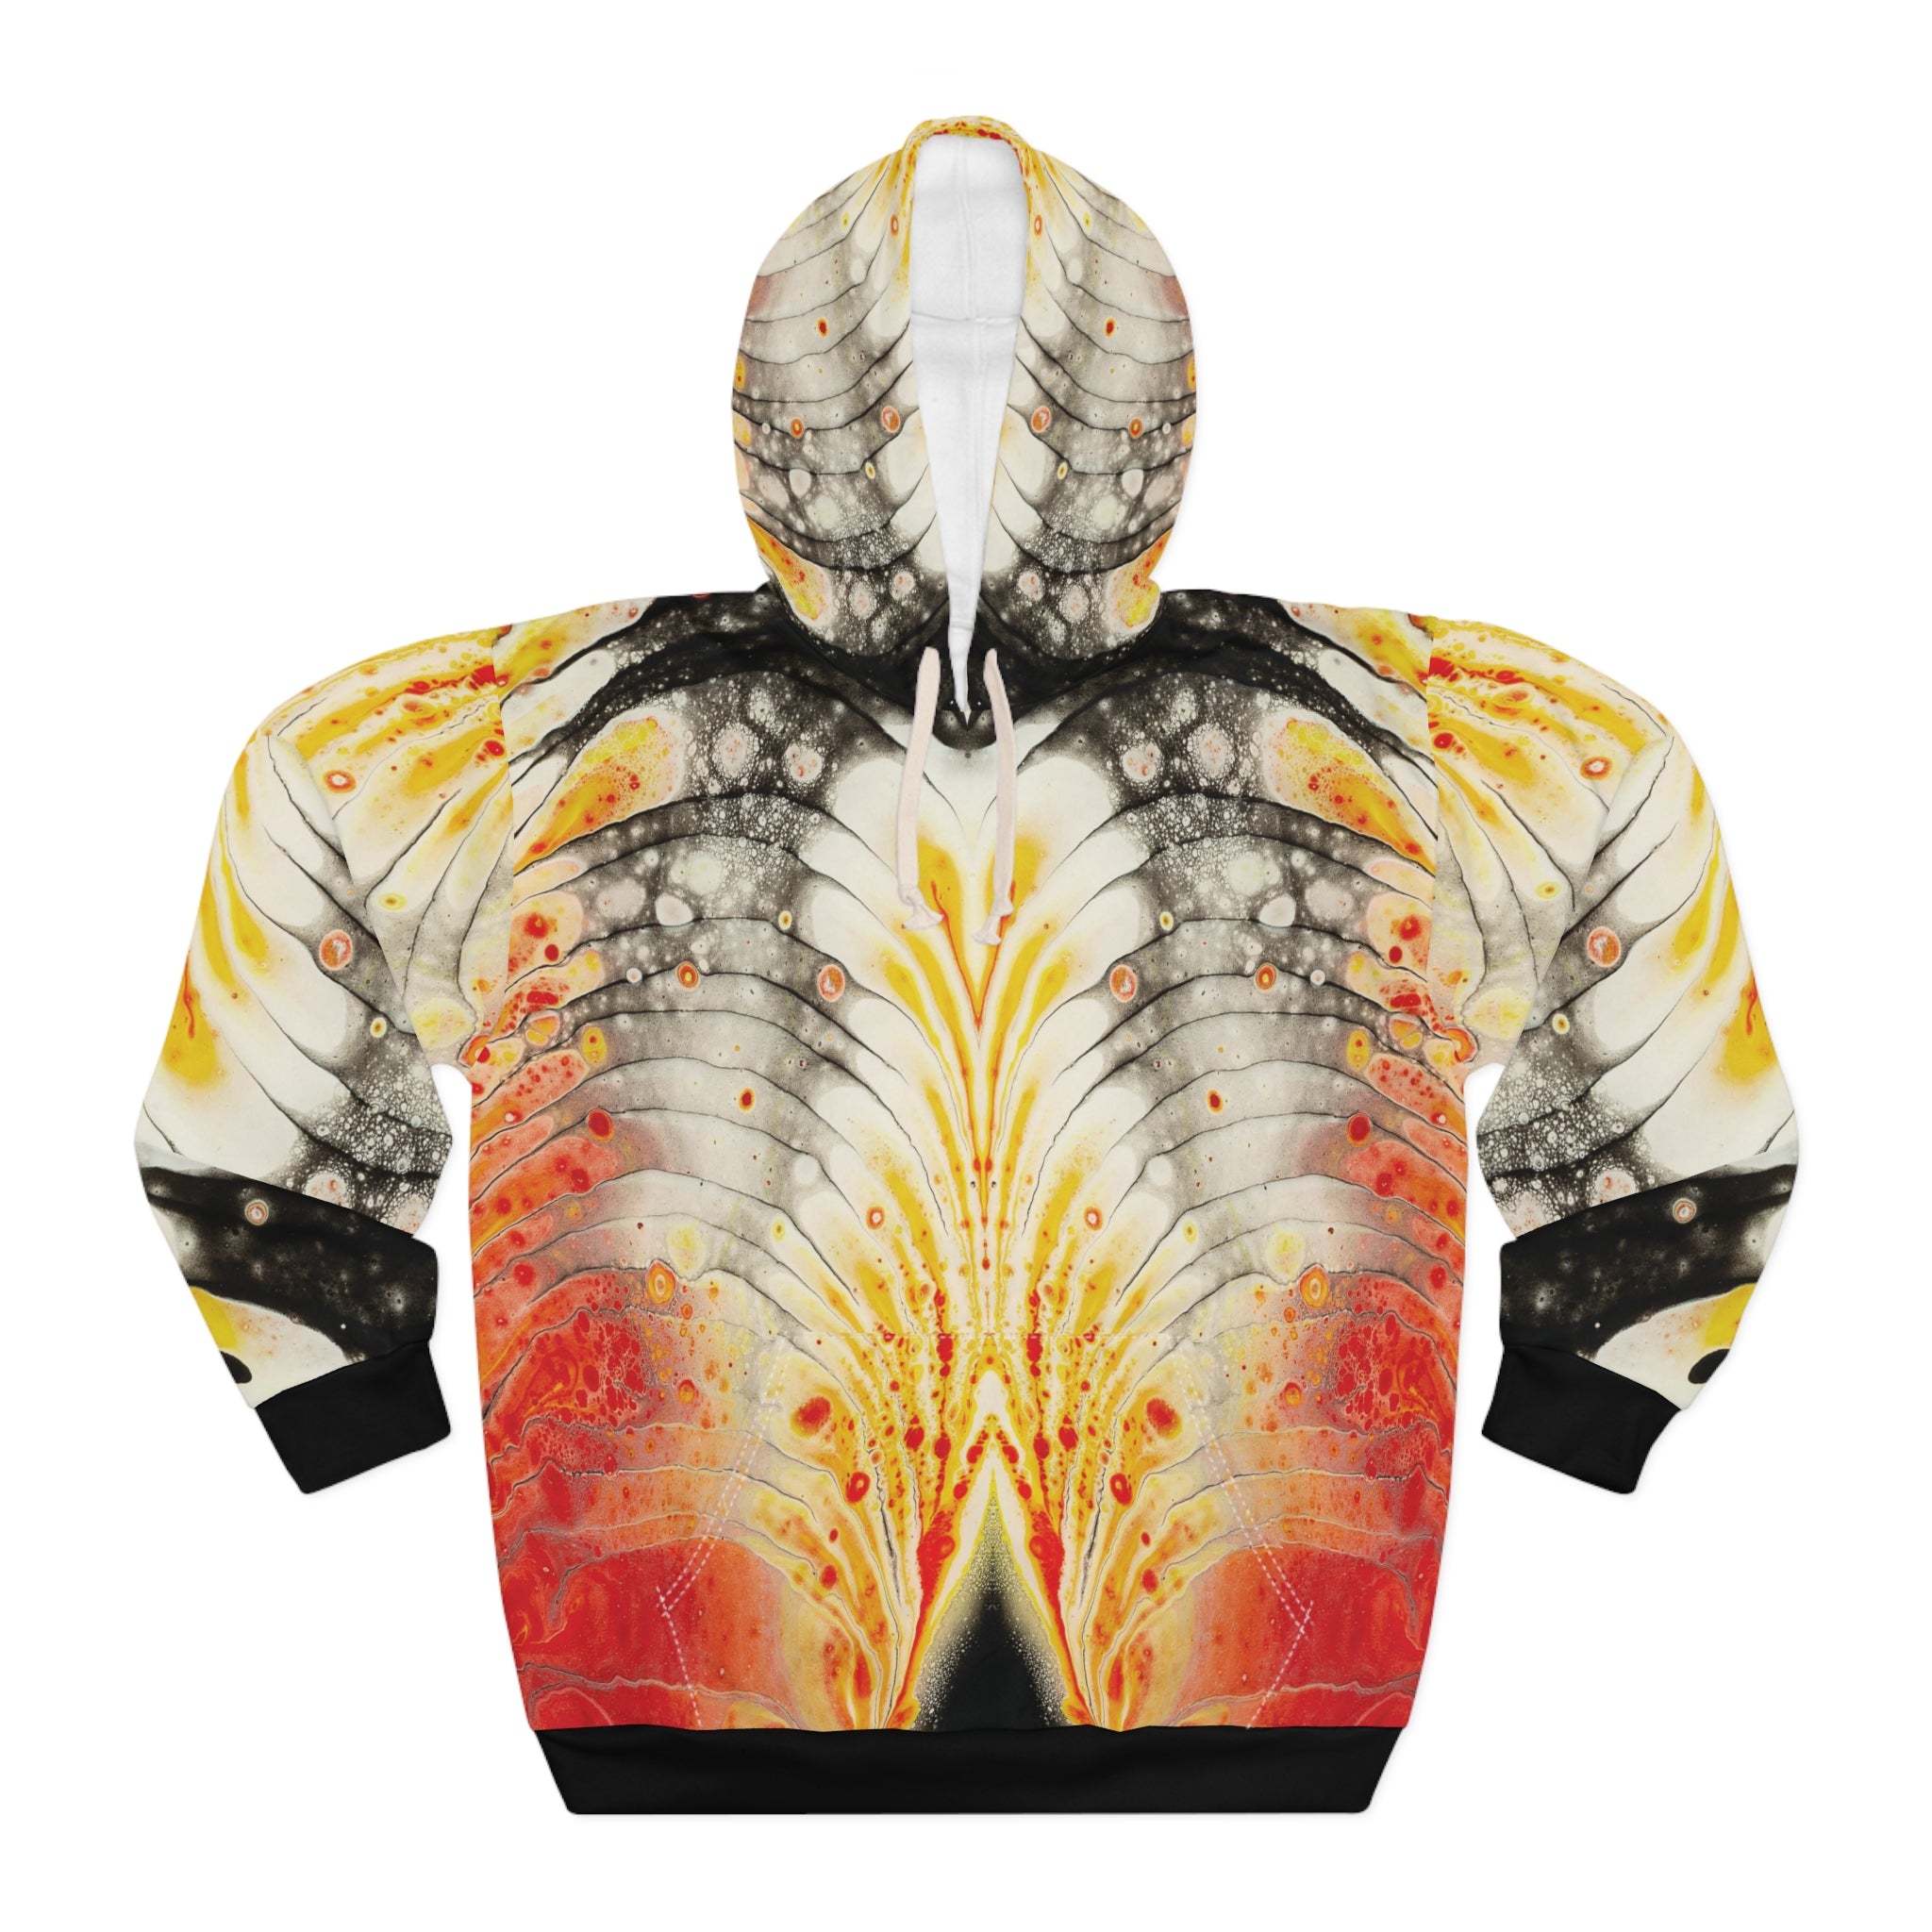 Cameron Creations - Alien Skin - Pullover Hoodie - Front